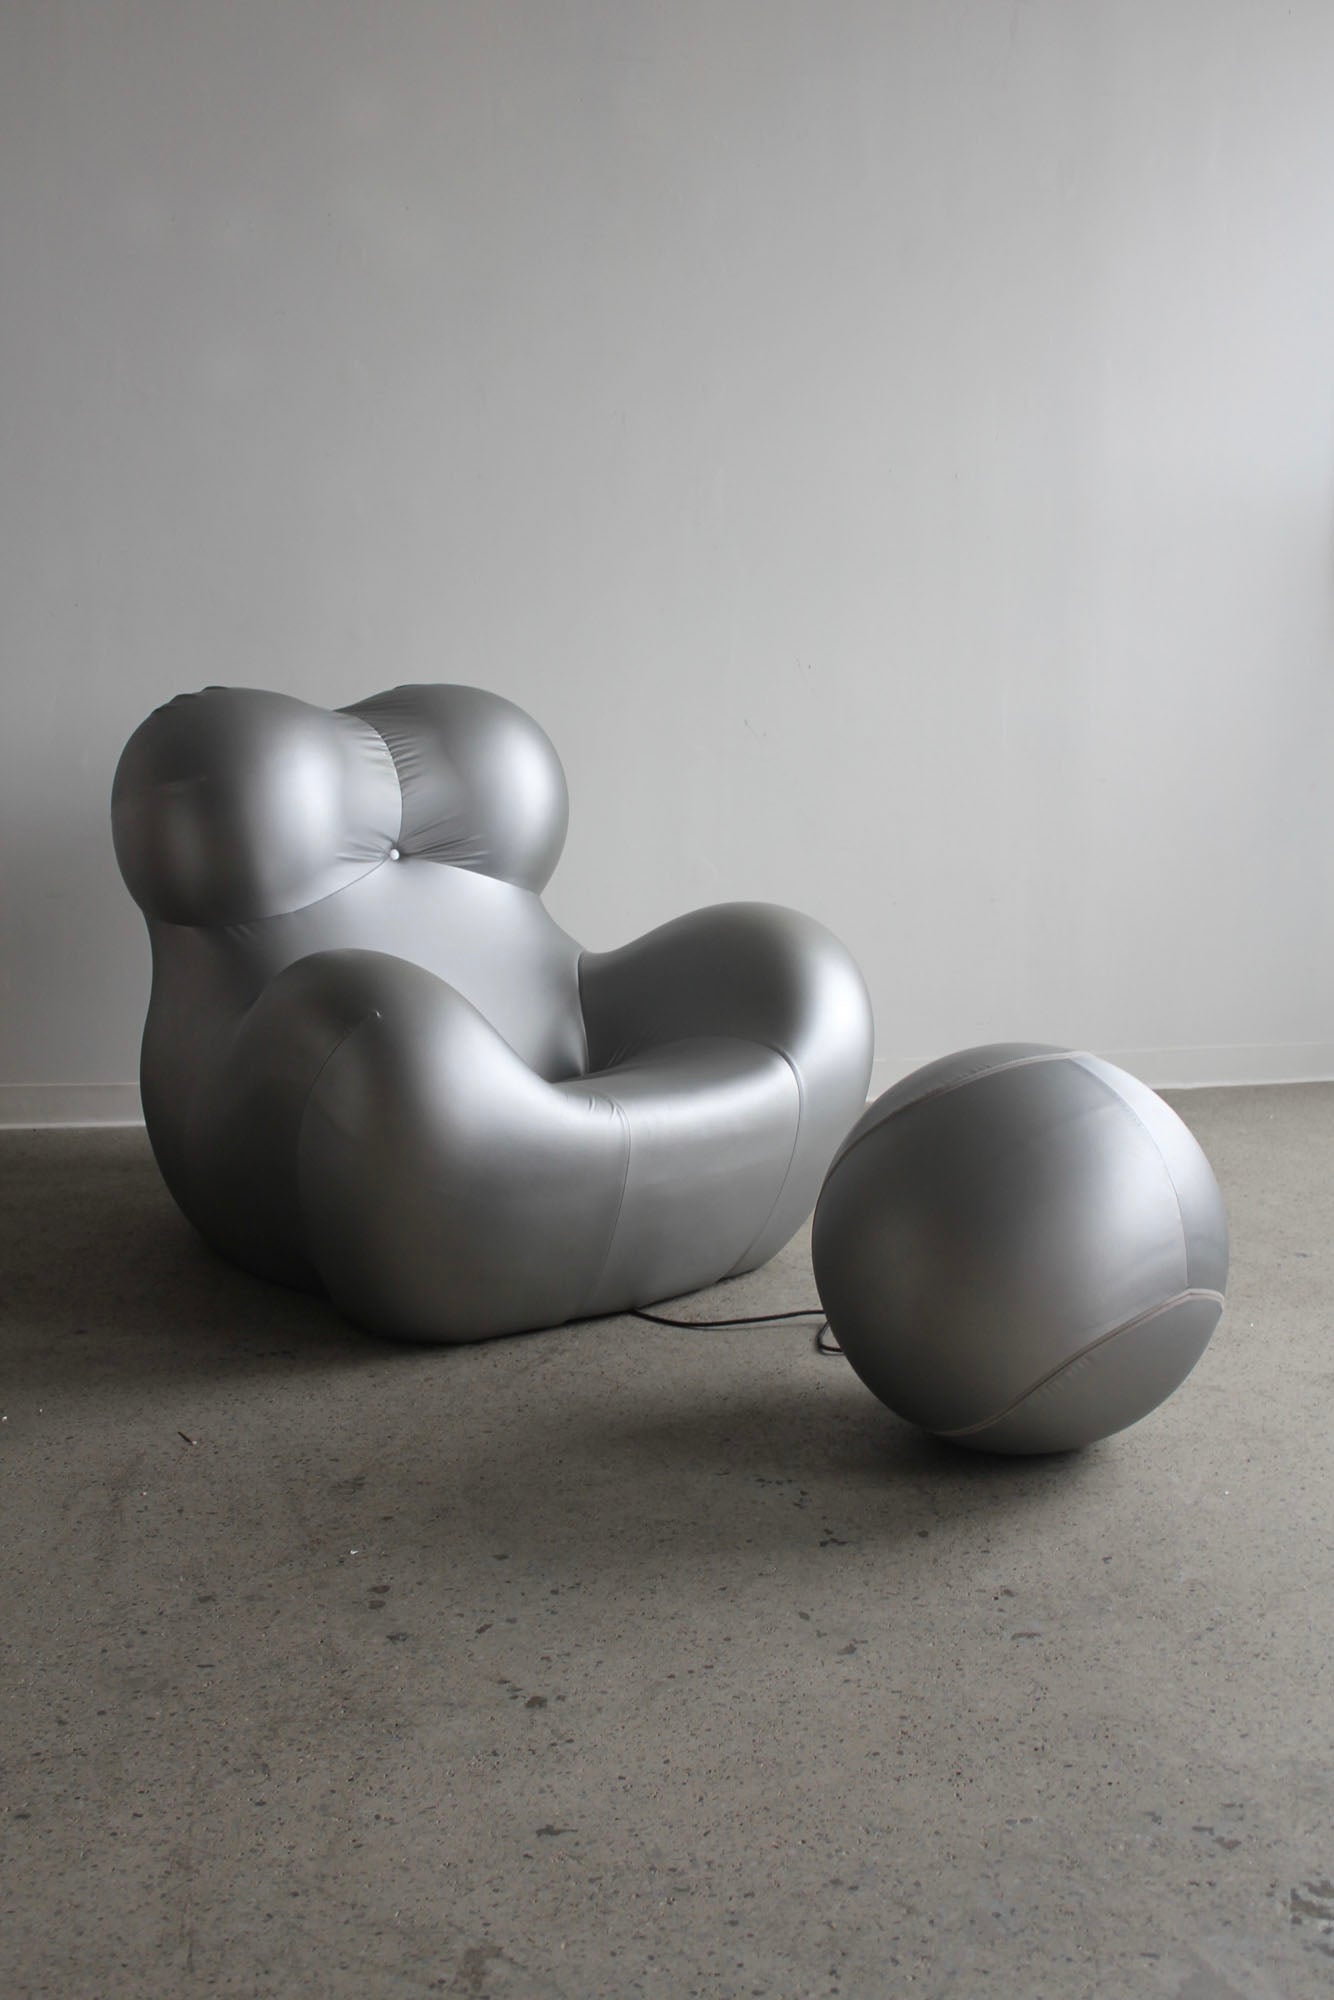 UP5 Lounge Chair and UP6 Ottoman by Gaetano Pesce for B&B Italia